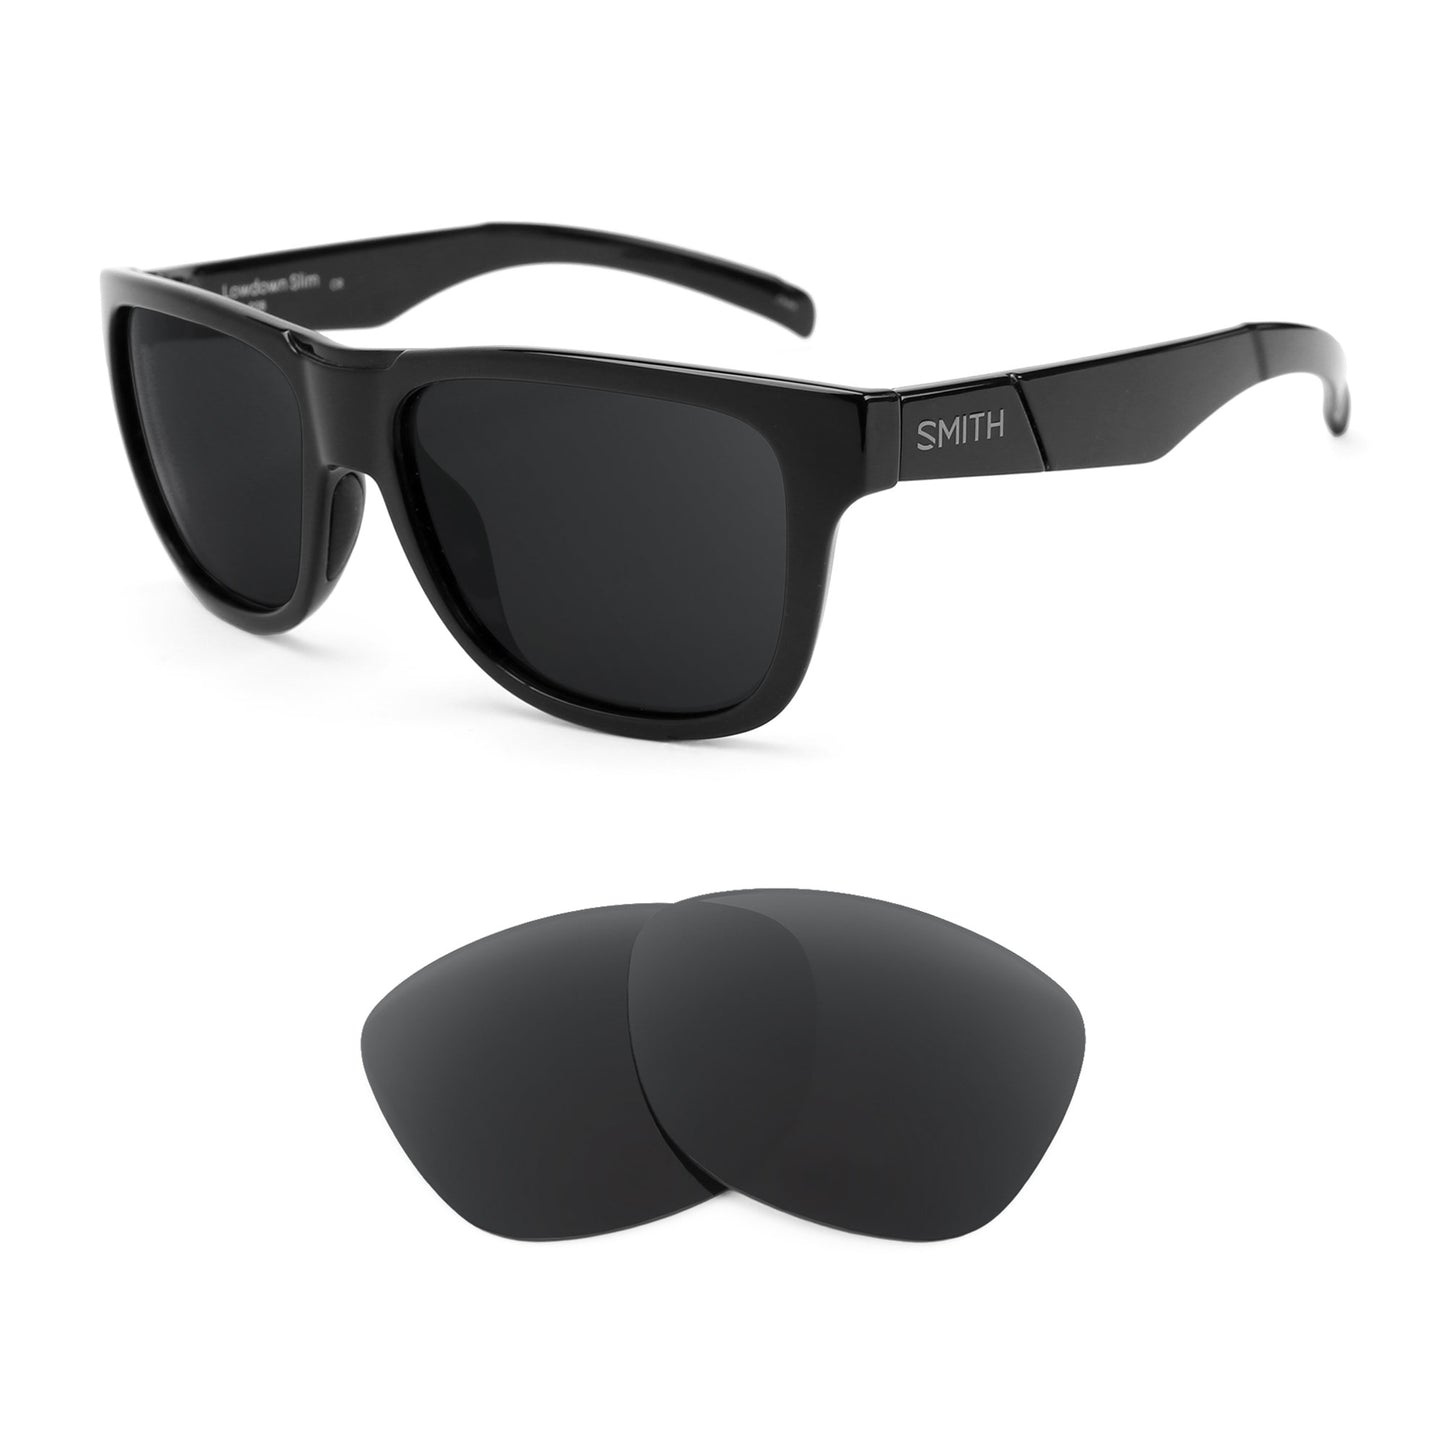 Smith Lowdown Slim sunglasses with replacement lenses